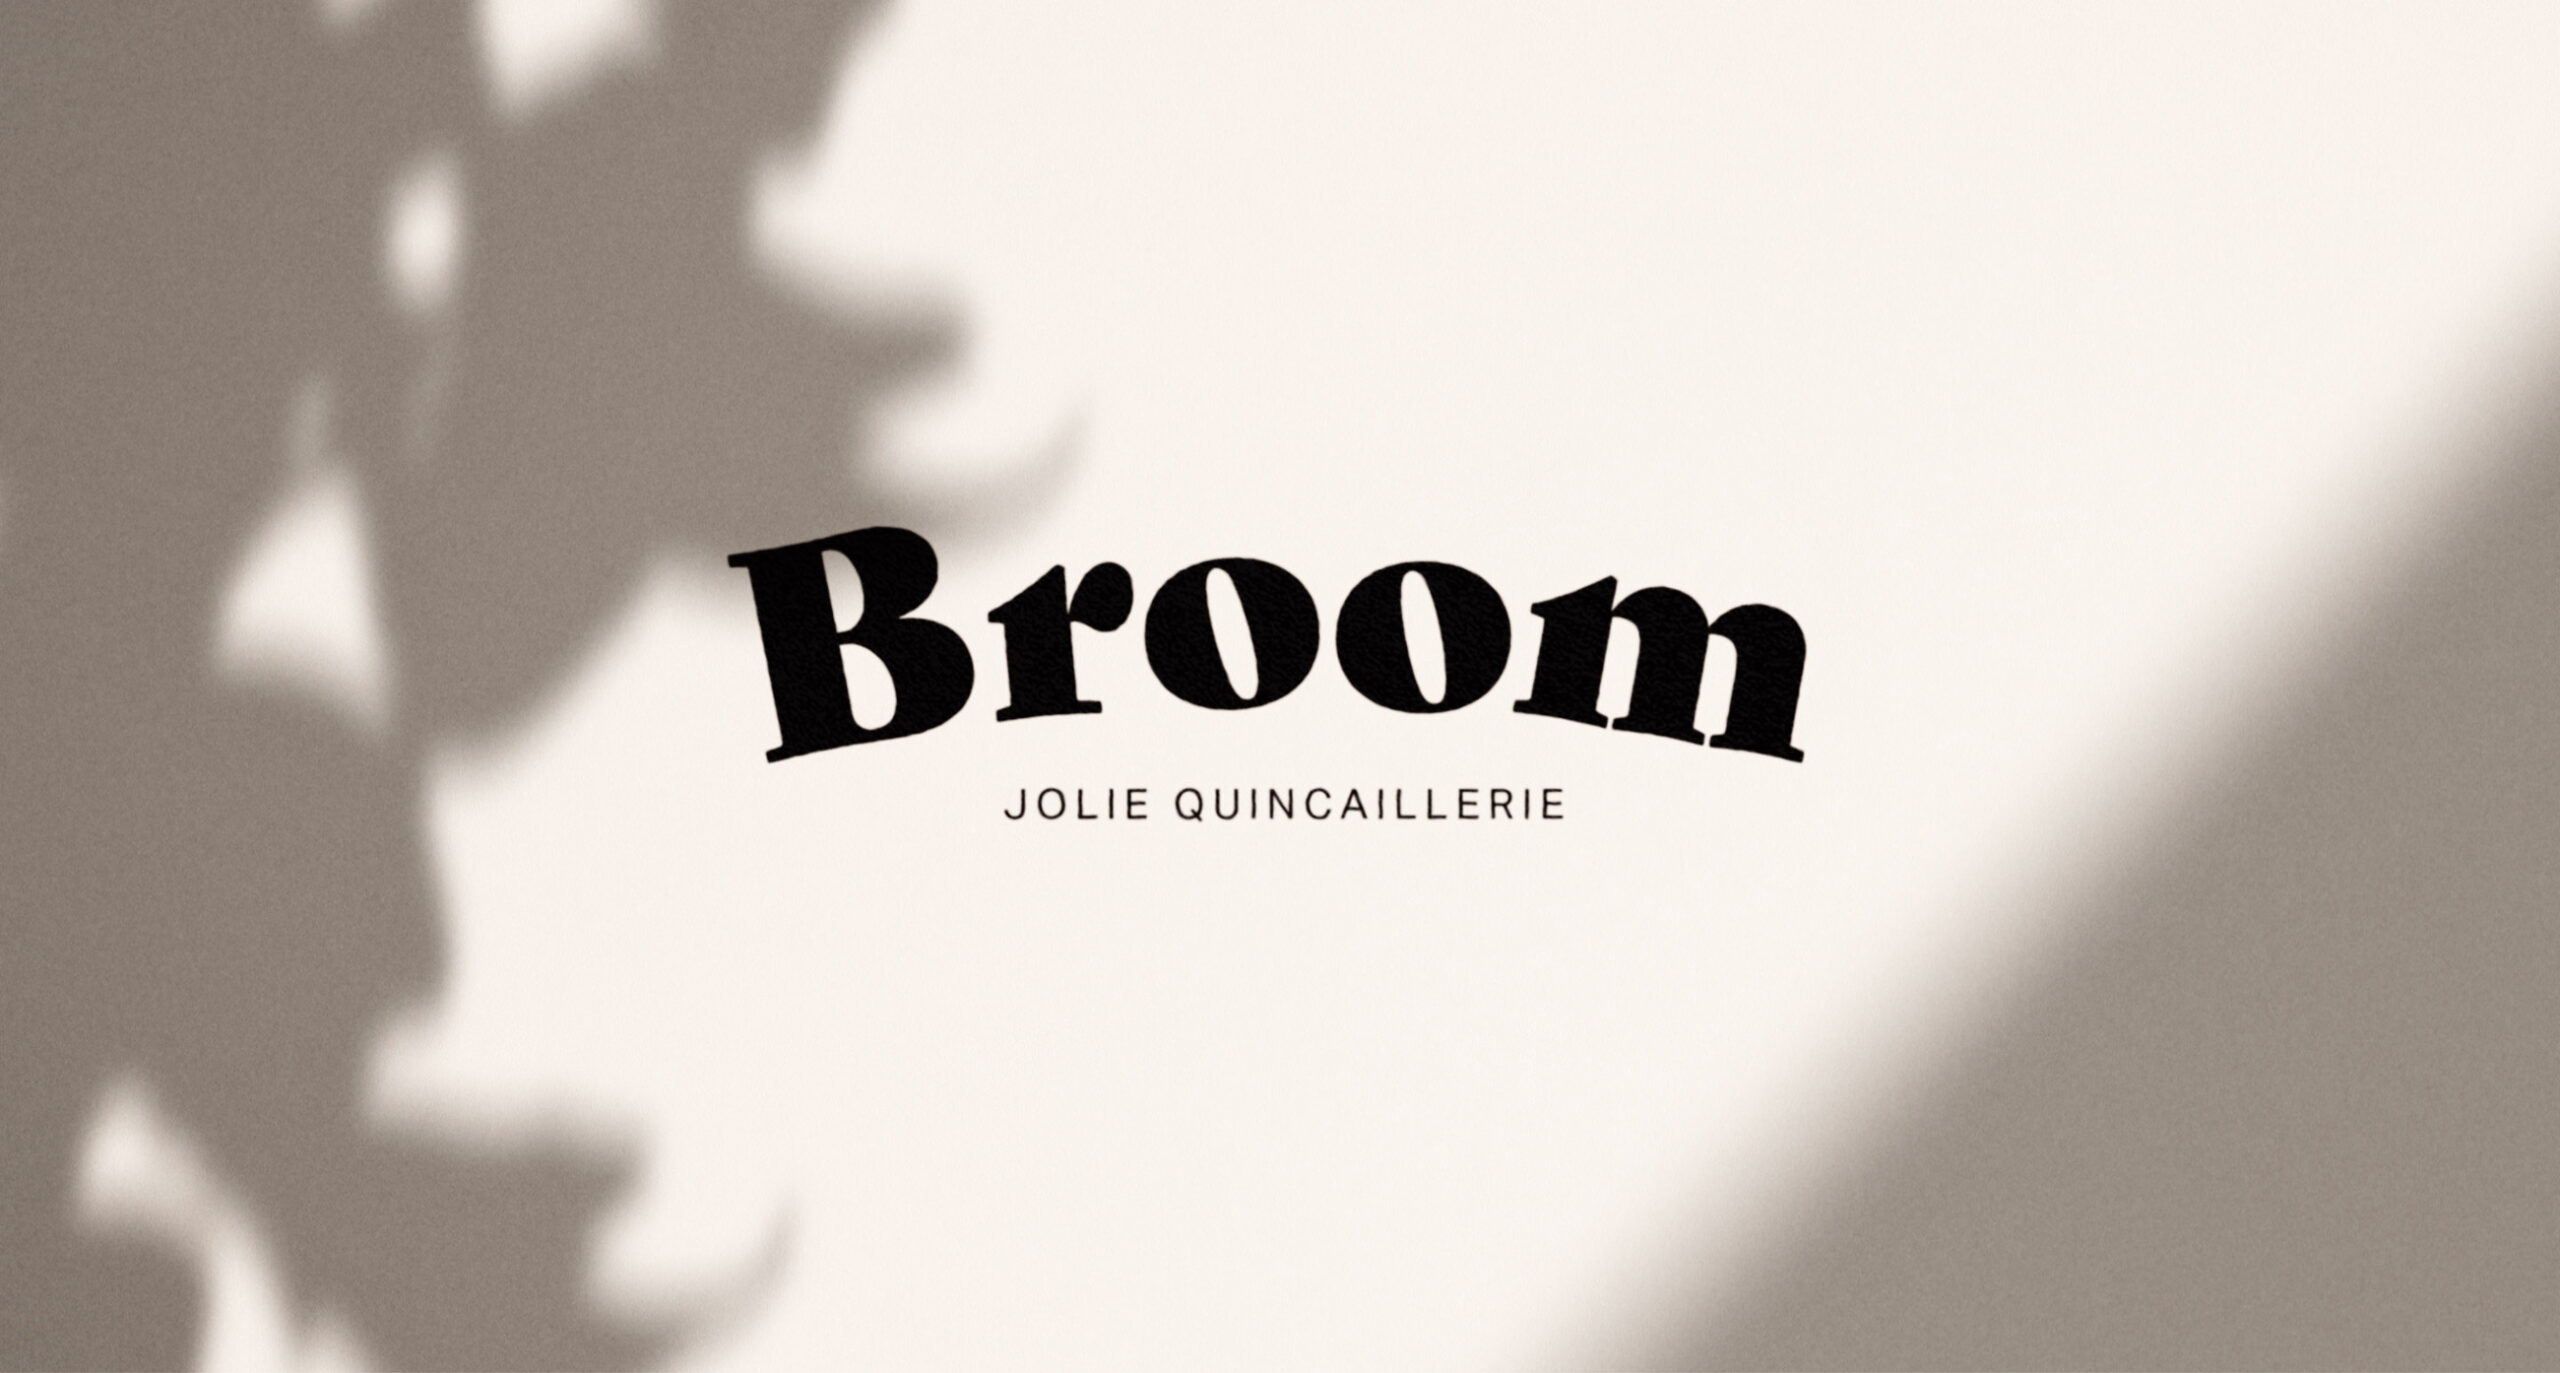 image for Broom, jolie quincaillerie